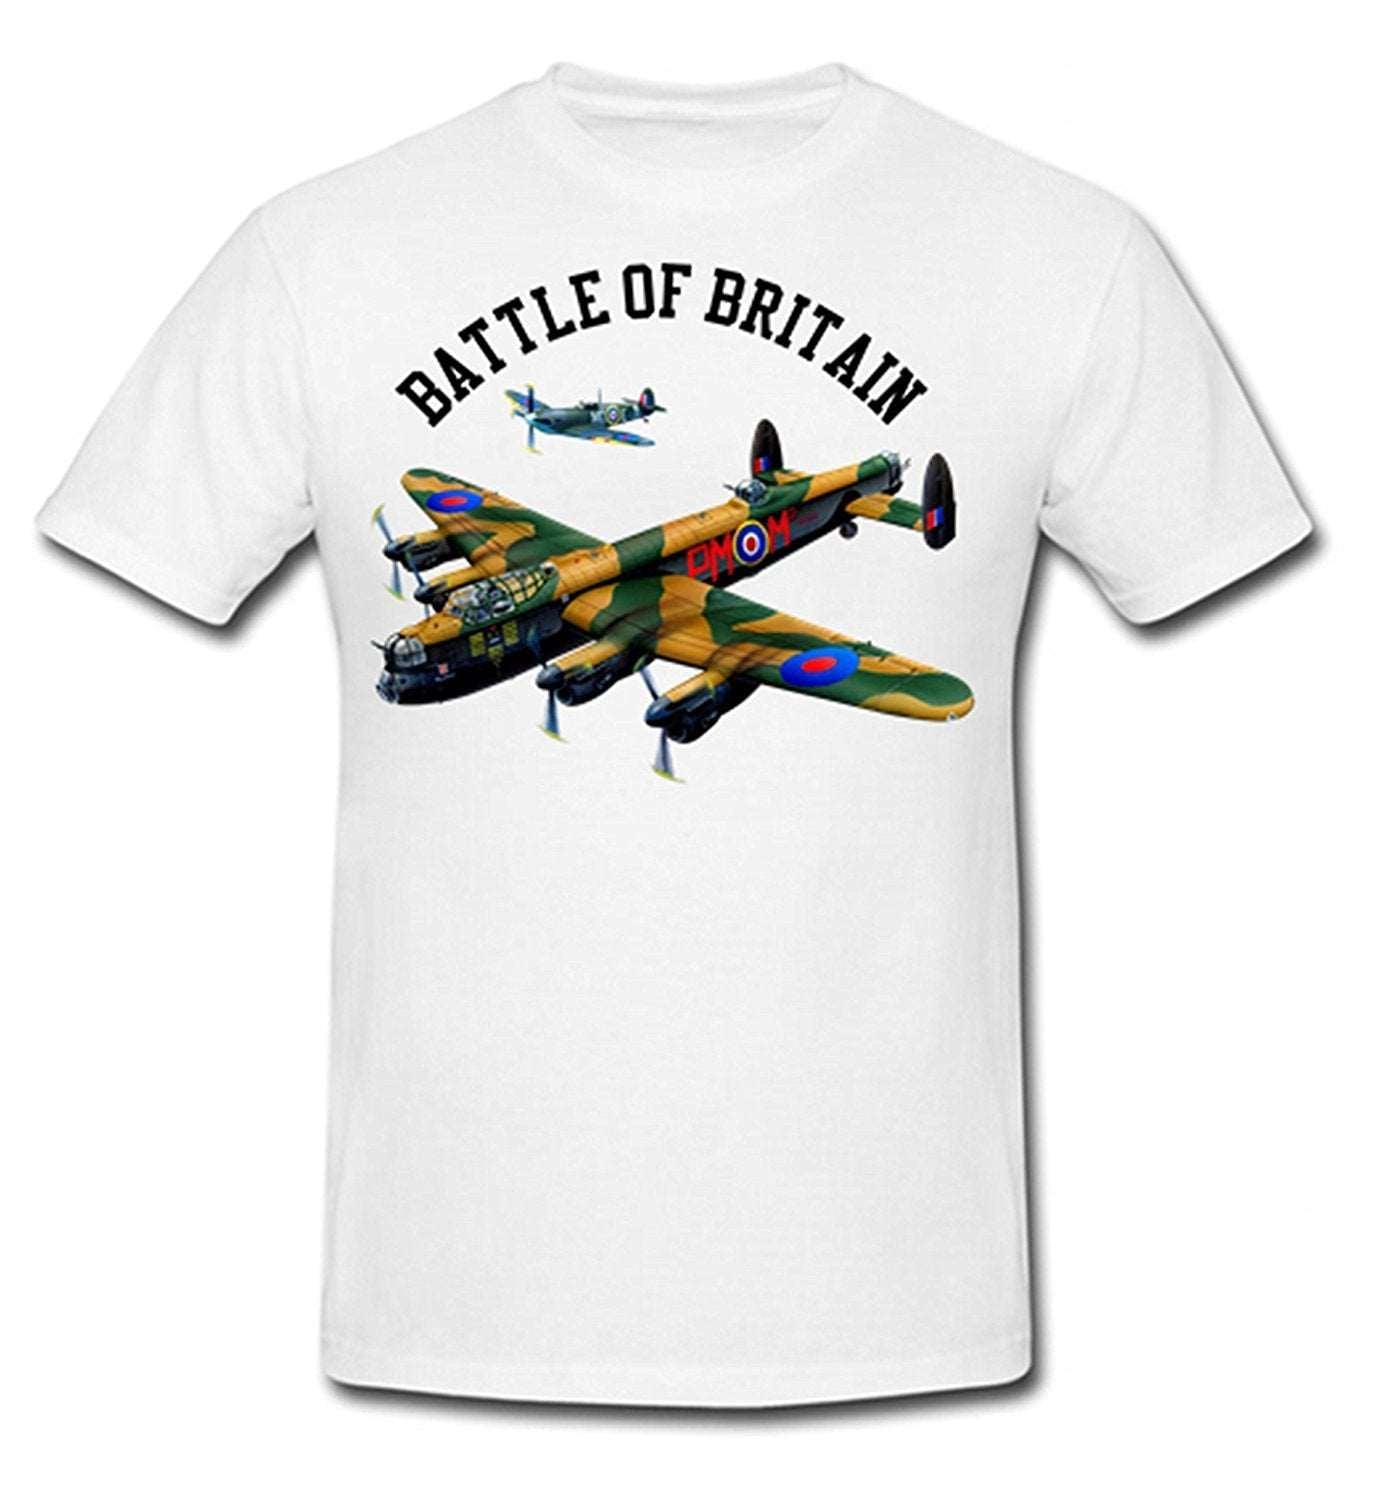 Bear Essentials Clothing. Battle Of Britain T Shirt - Army 1157 kit Small Army 1157 Kit Veterans Owned Business